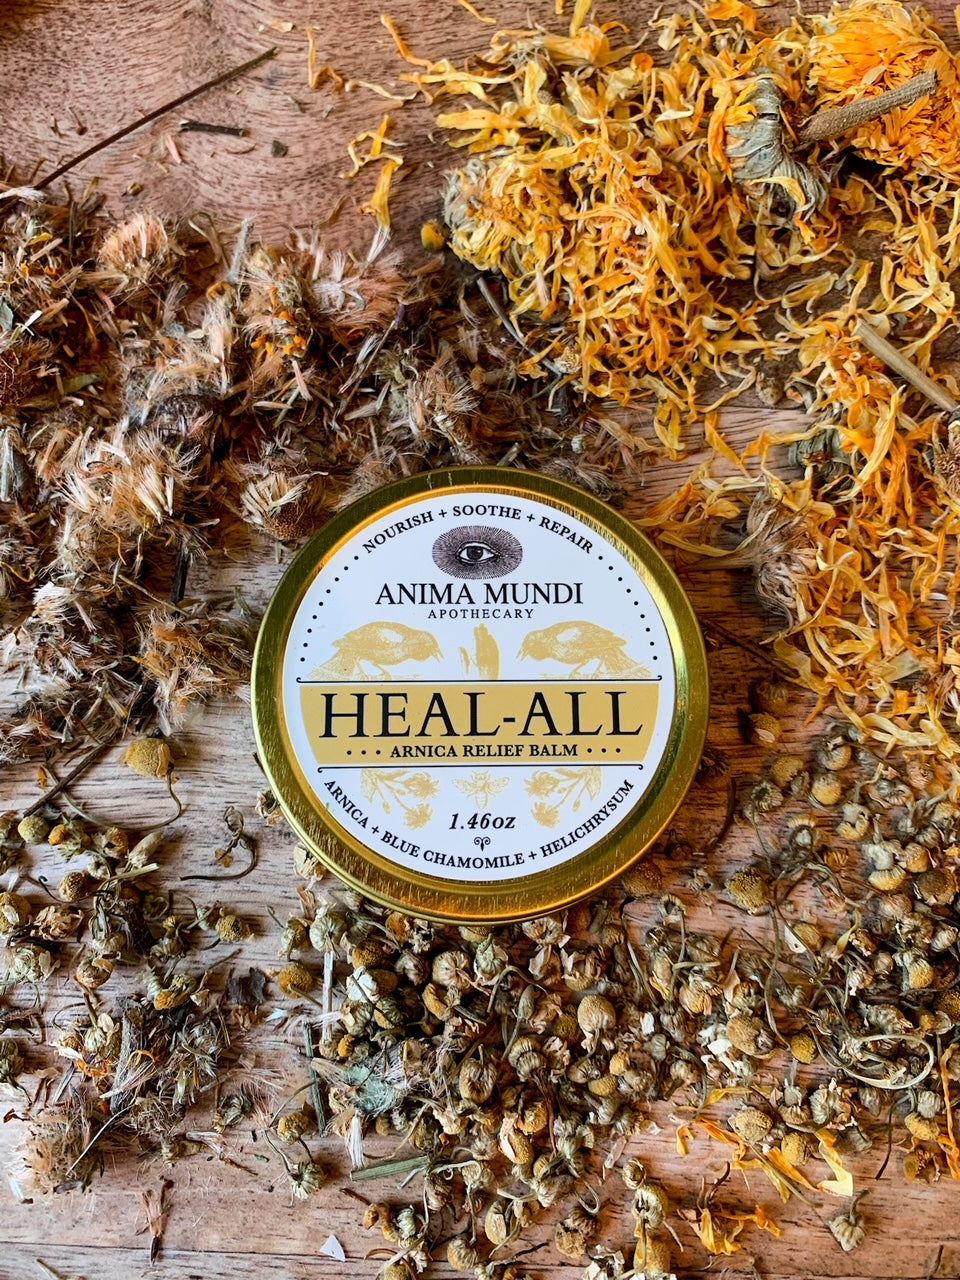 HEAL-ALL Arnica Relief Balm | Nourish, Soothe + Repair